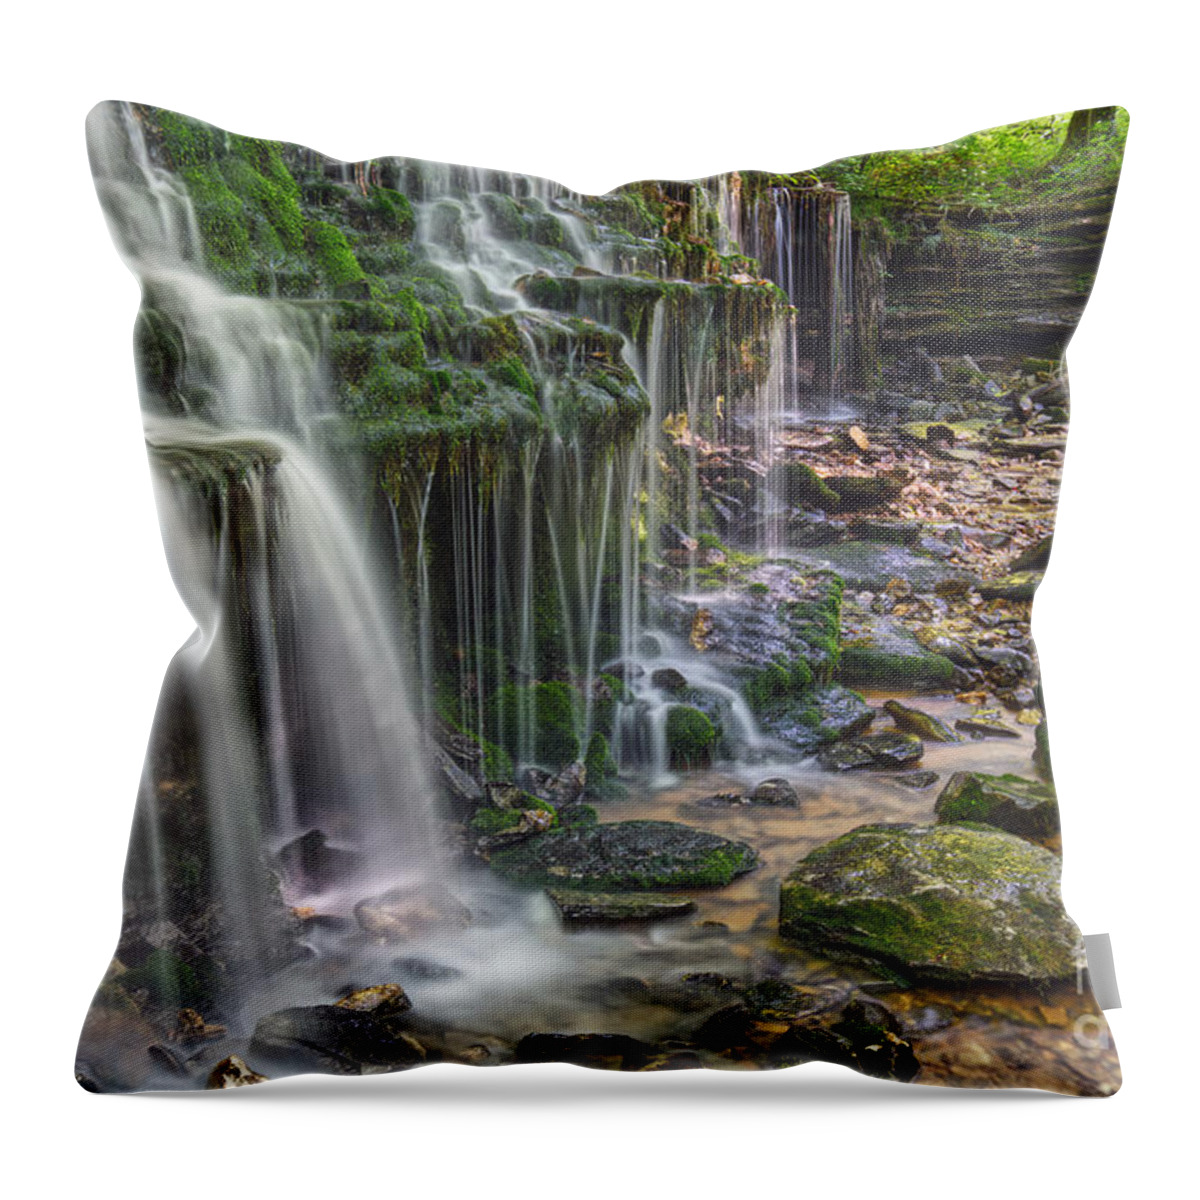 Waterfalls Throw Pillow featuring the photograph City Lake Falls 8 by Phil Perkins